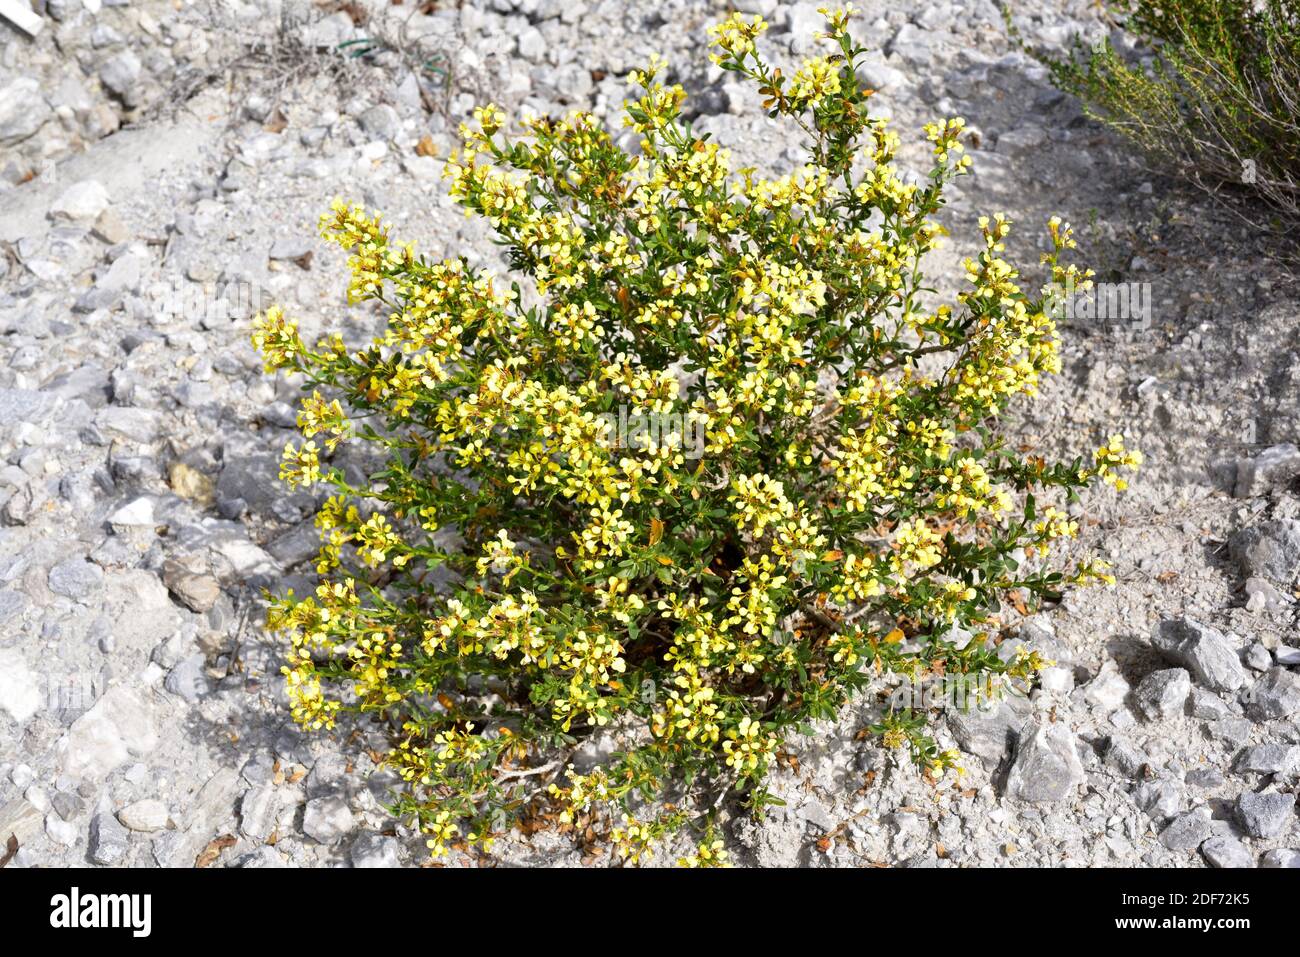 Pitano (Vella pseudocytisus) is a shrub endemic to gypsum or saline soil to Spain (center and southeastern). Stock Photo